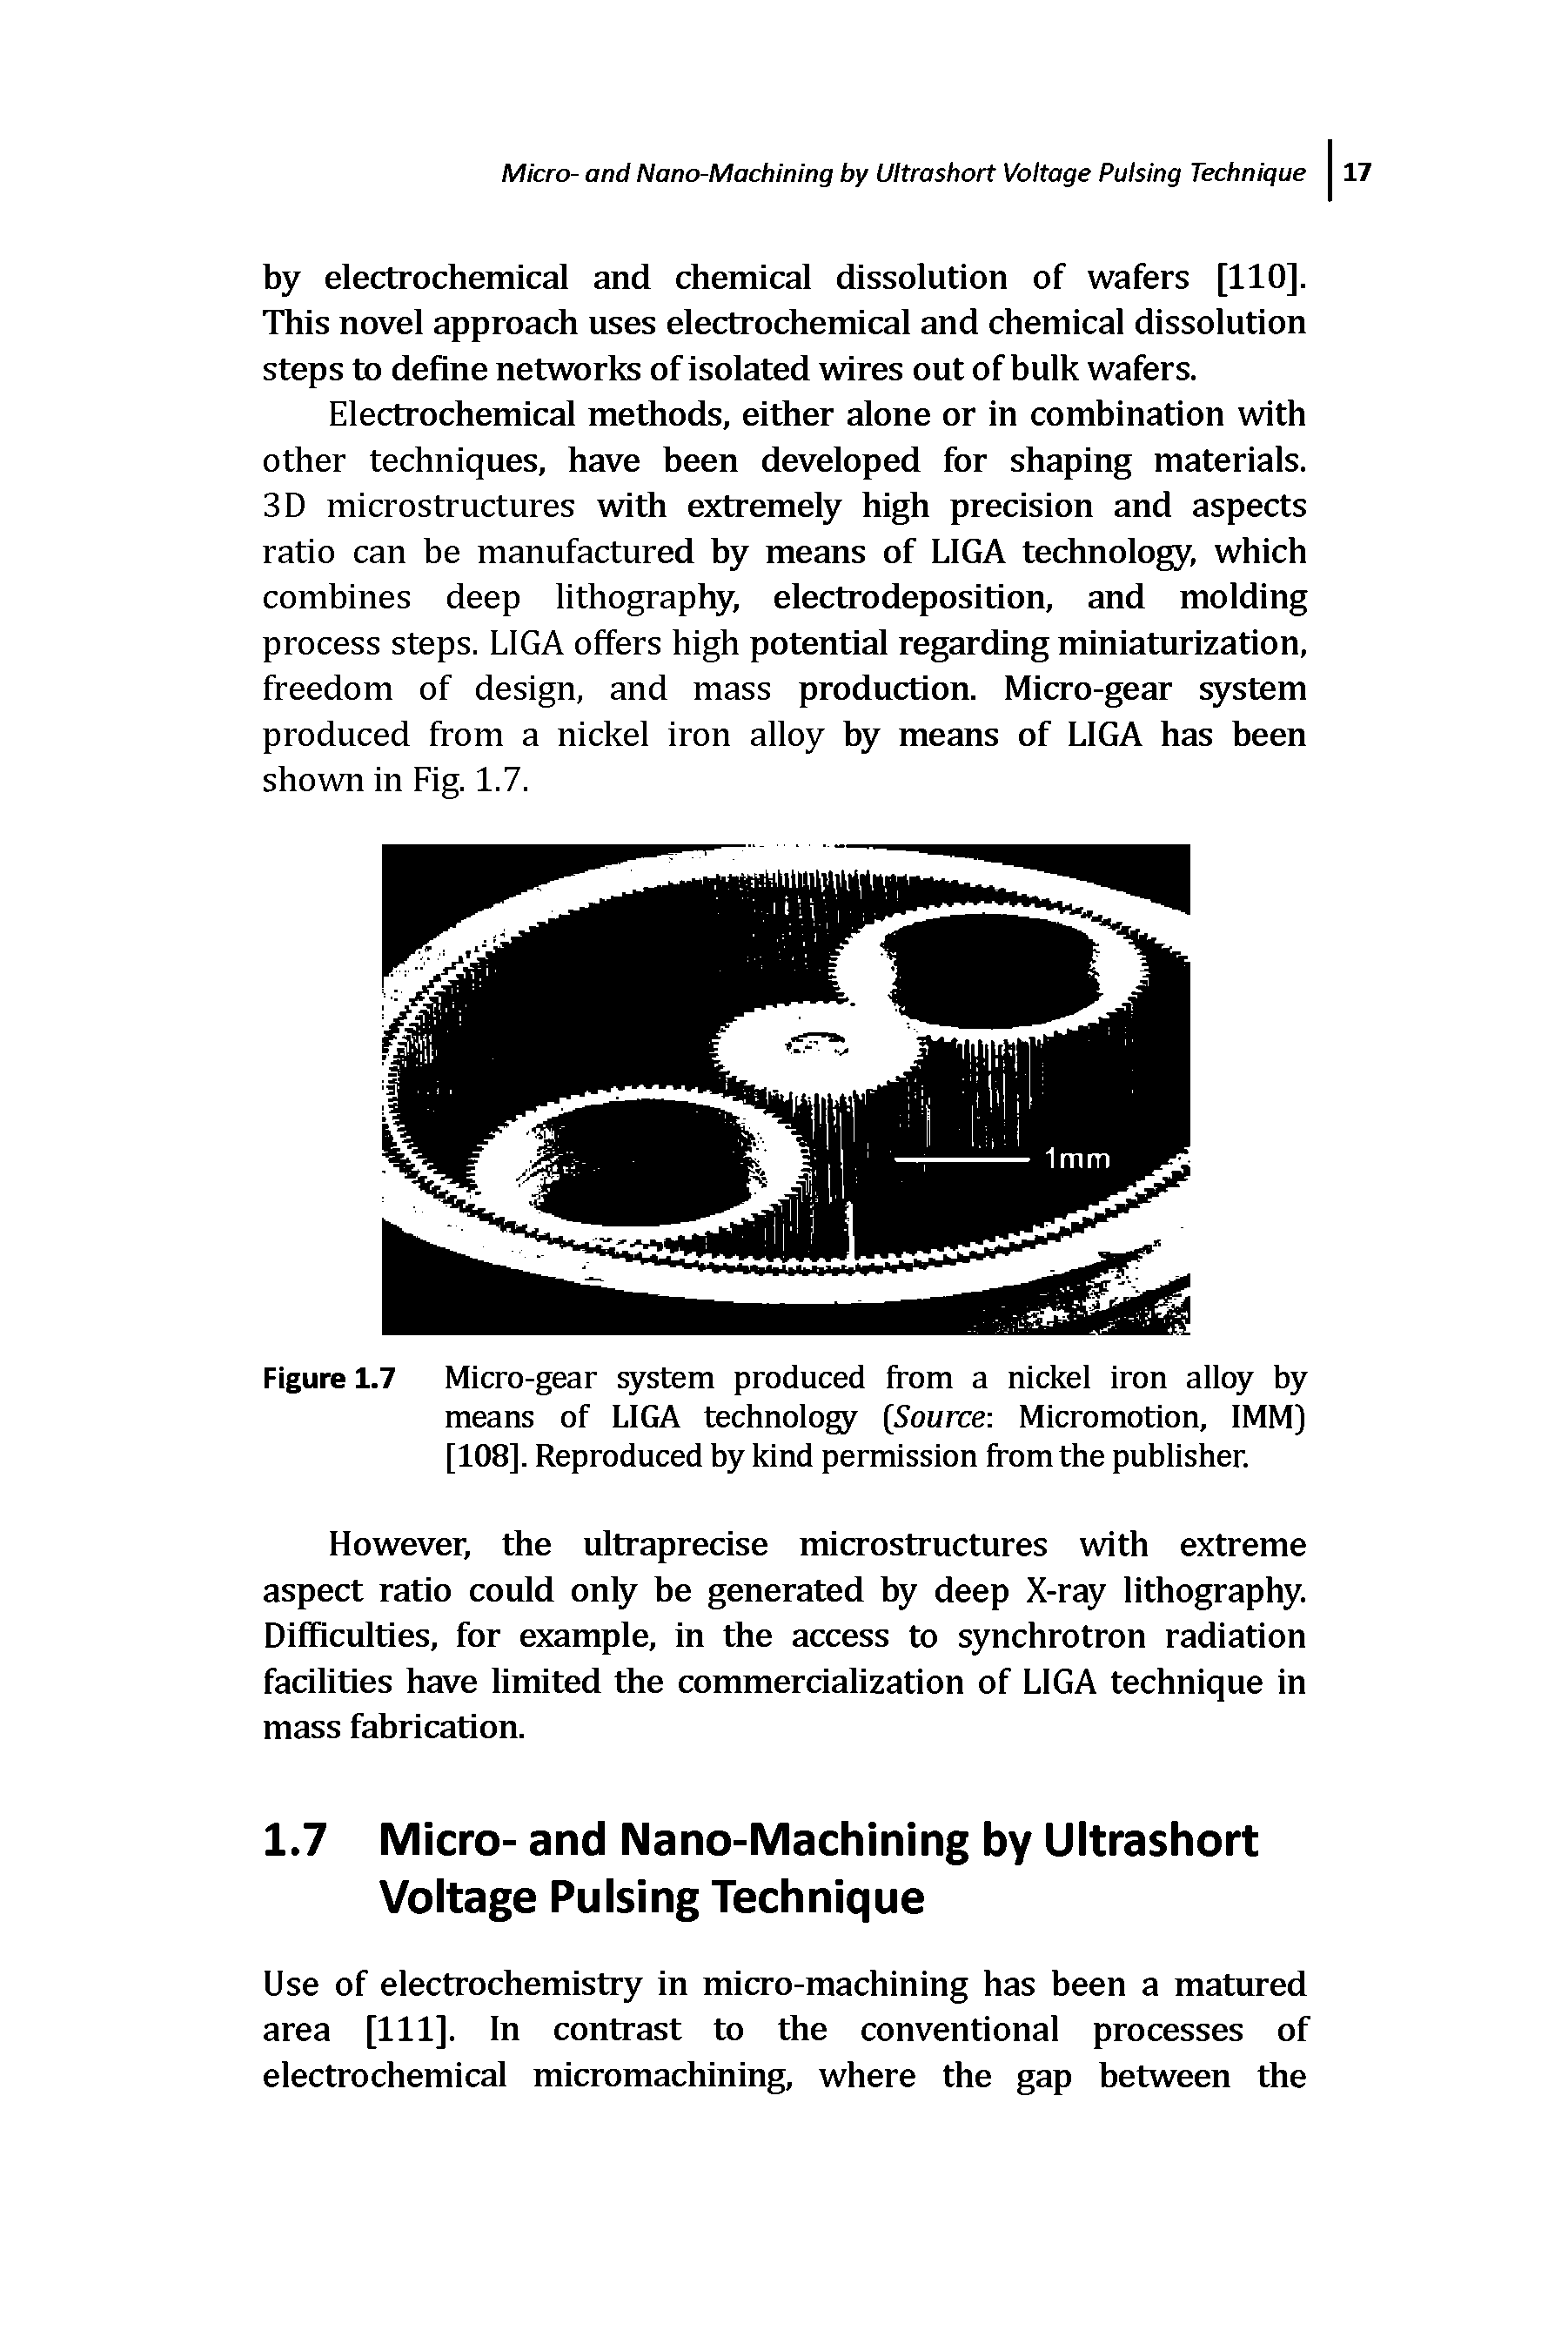 Figure 1.7 Micro-gear system produced from a nickel iron alloy by means of LIGA technology [Source Micromotion, IMM) [108]. Reproduced by kind permission from the publisher.